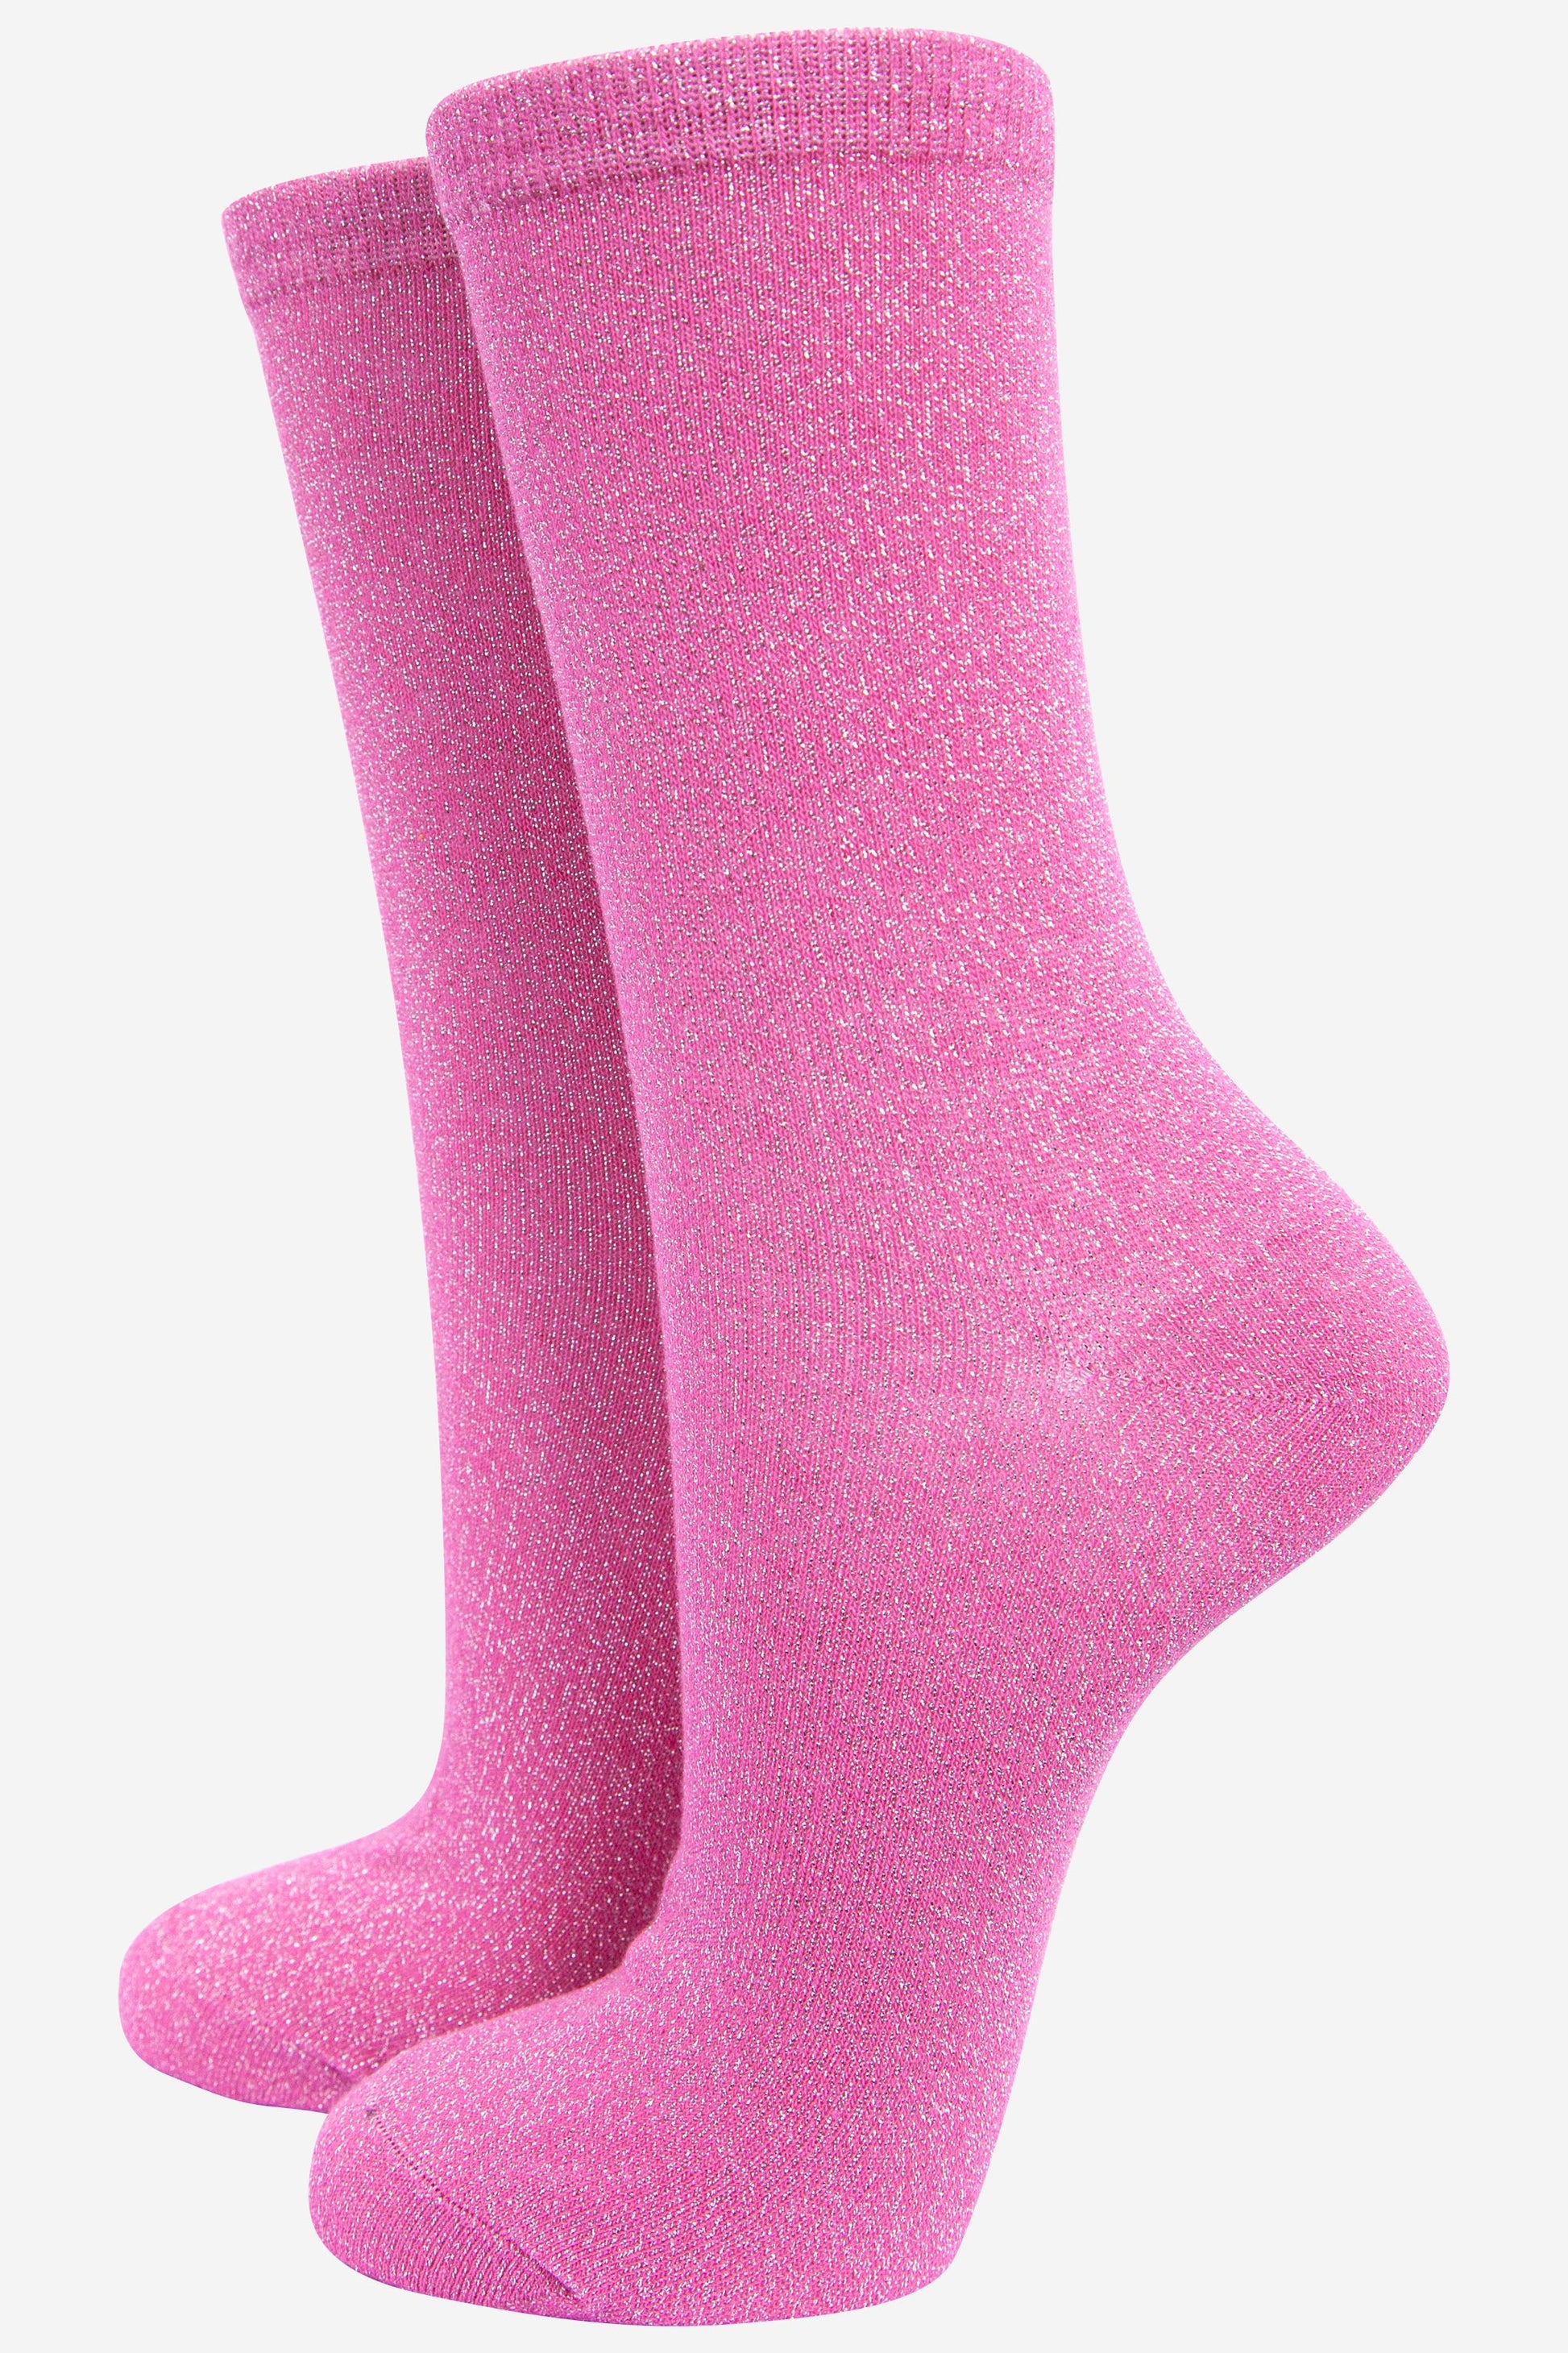 pink sparkly glitter ankle socks made with cotton 